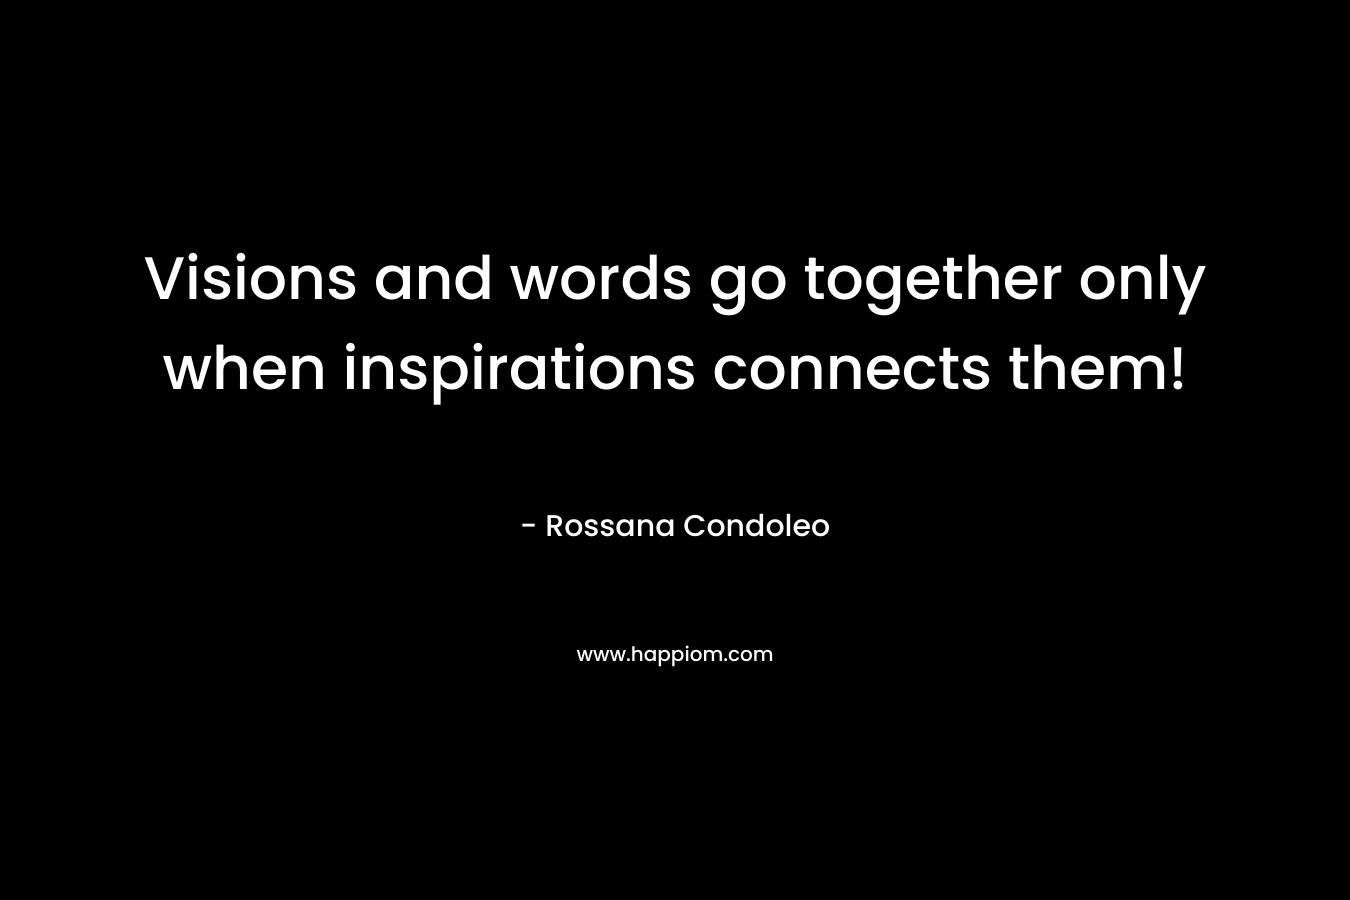 Visions and words go together only when inspirations connects them! – Rossana Condoleo